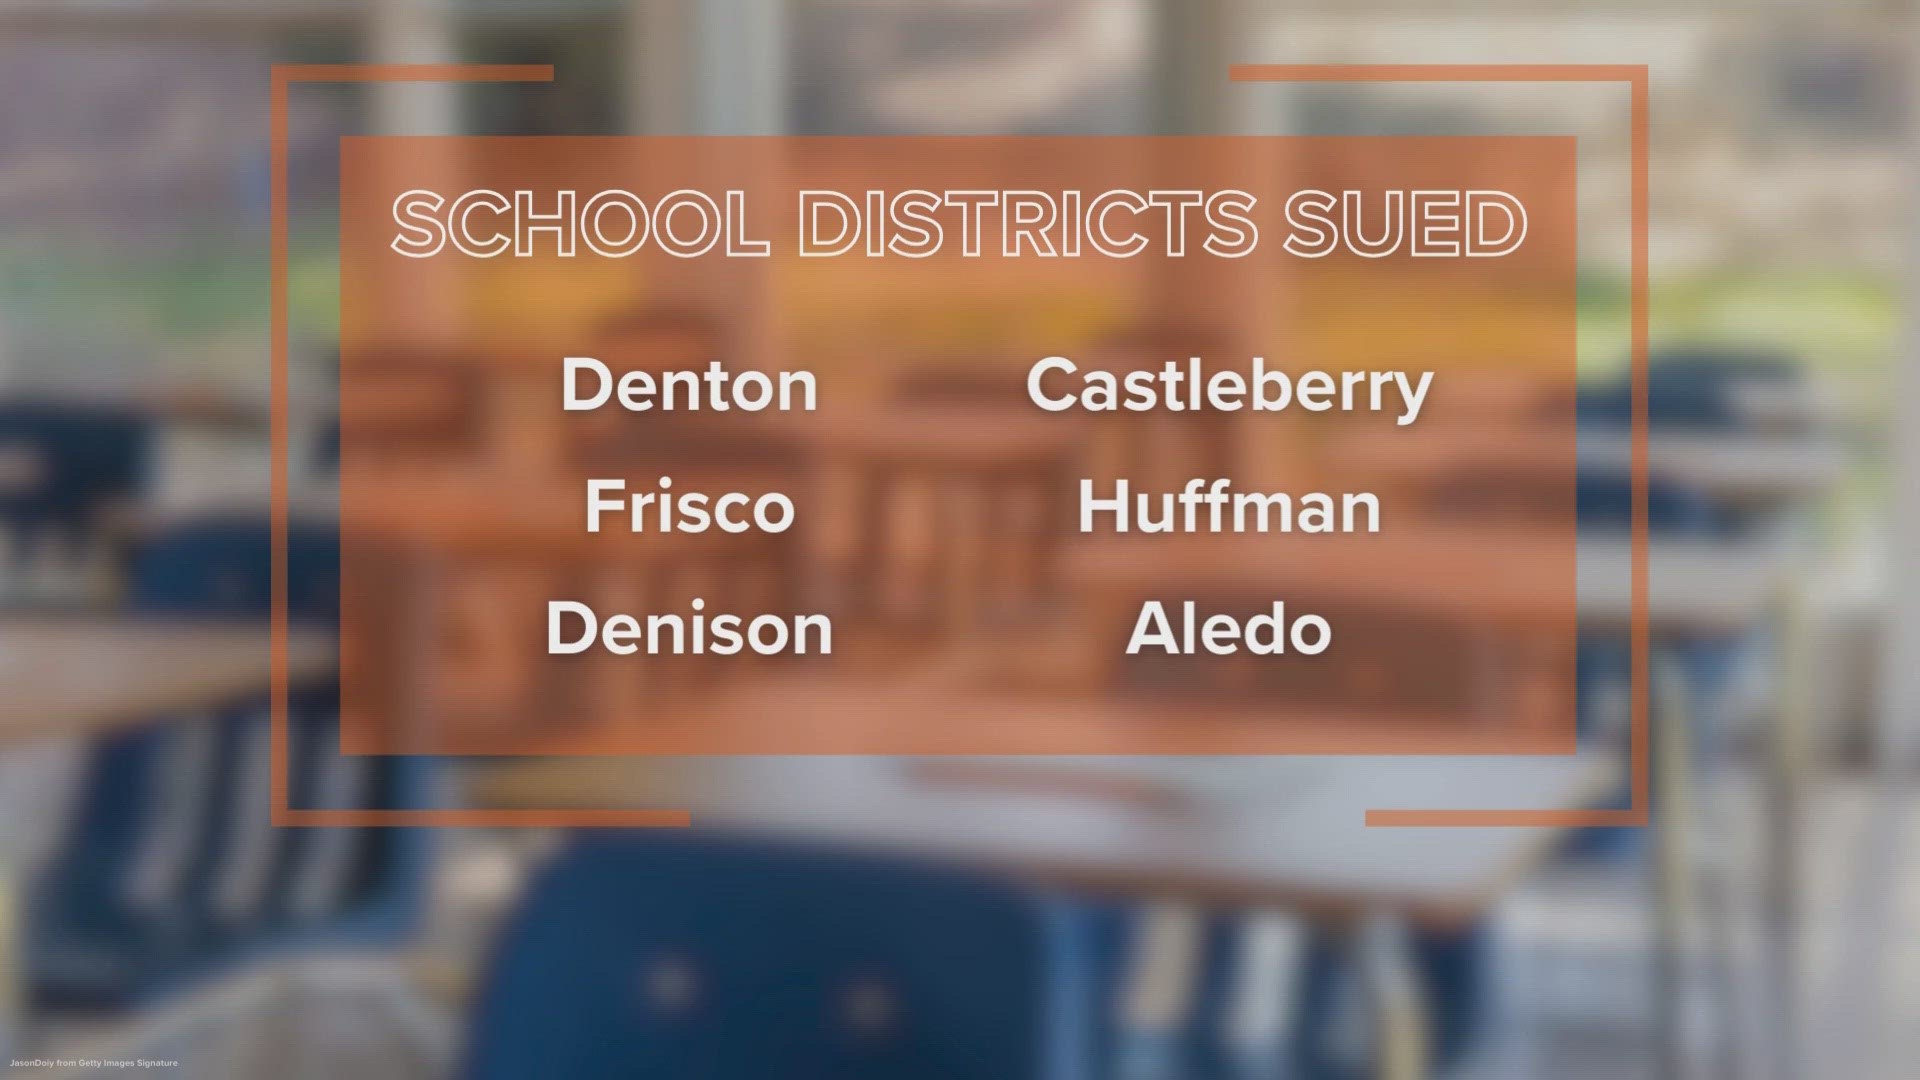 Ken Paxton has added Aledo ISD to the list of schools he is suing.